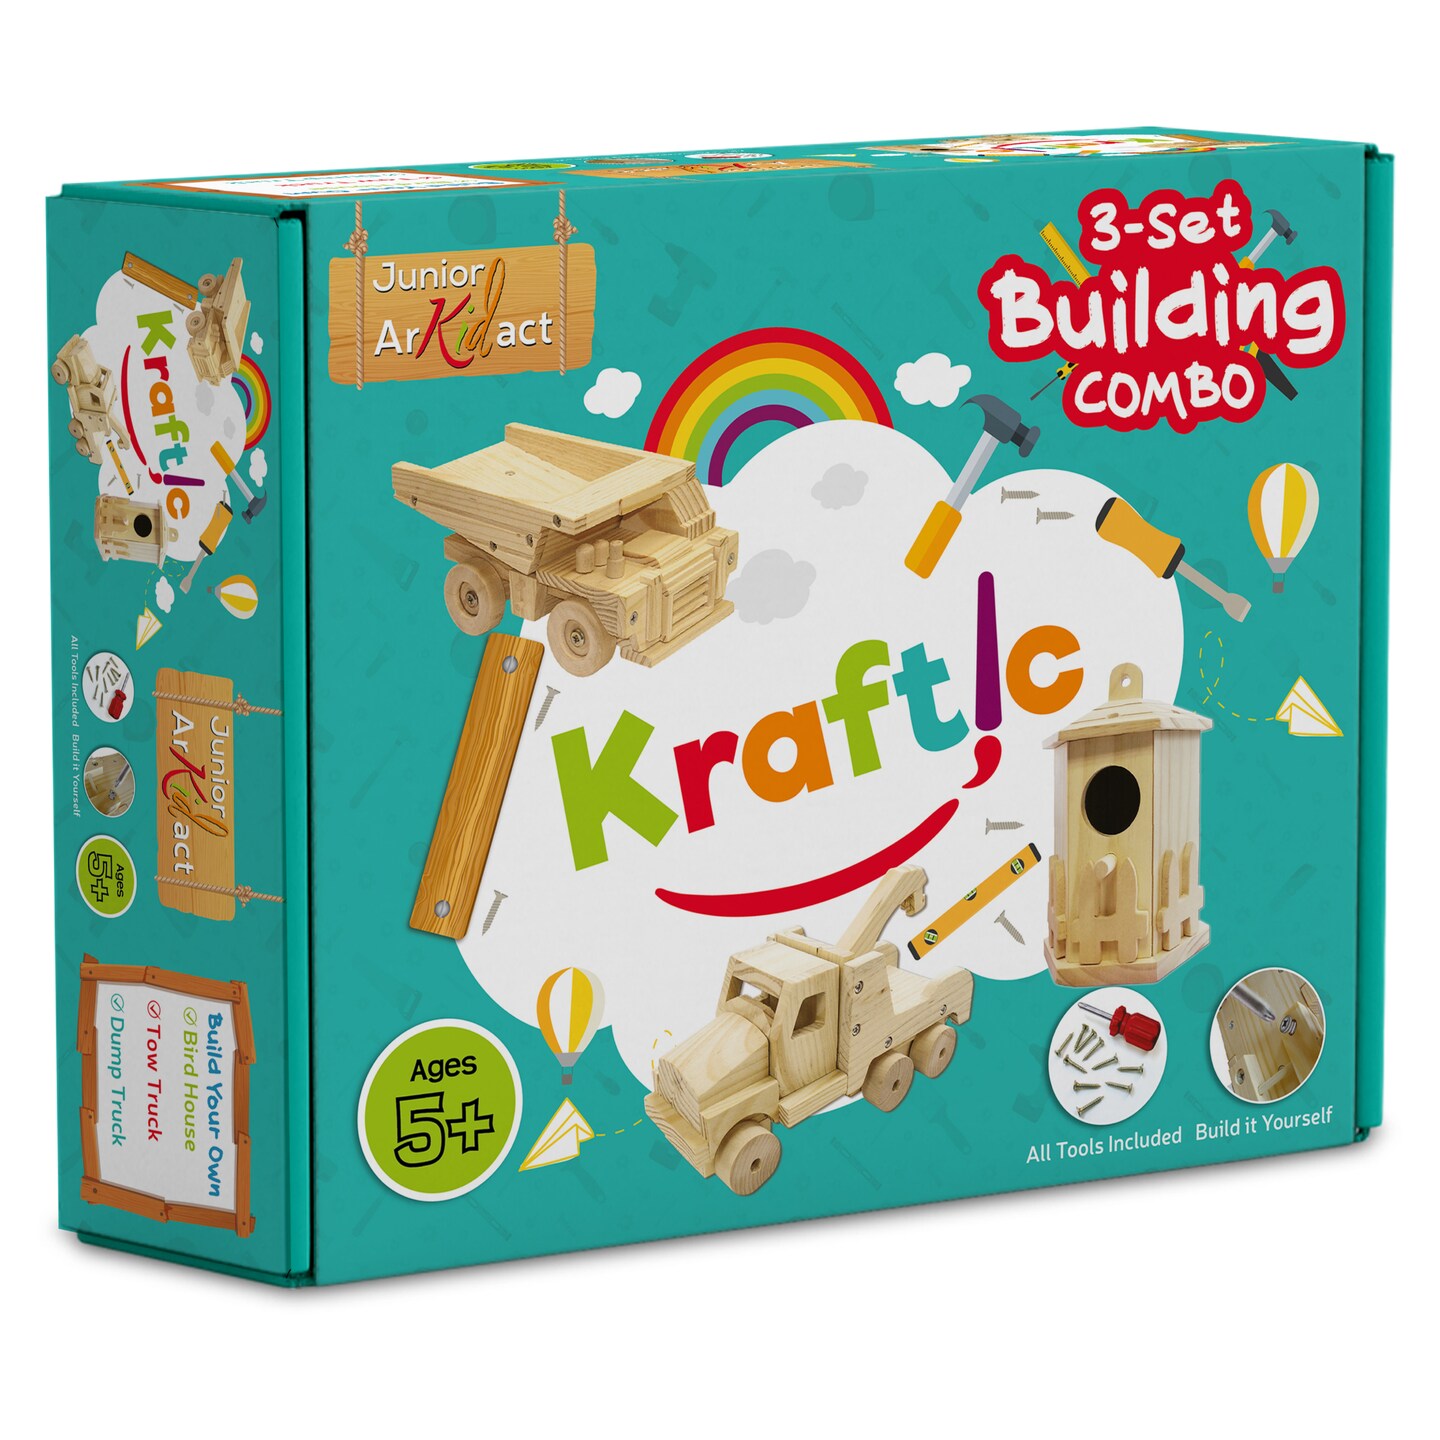 Buy Kraftic Woodworking Building Kit for Kids and Adults, Set of 3